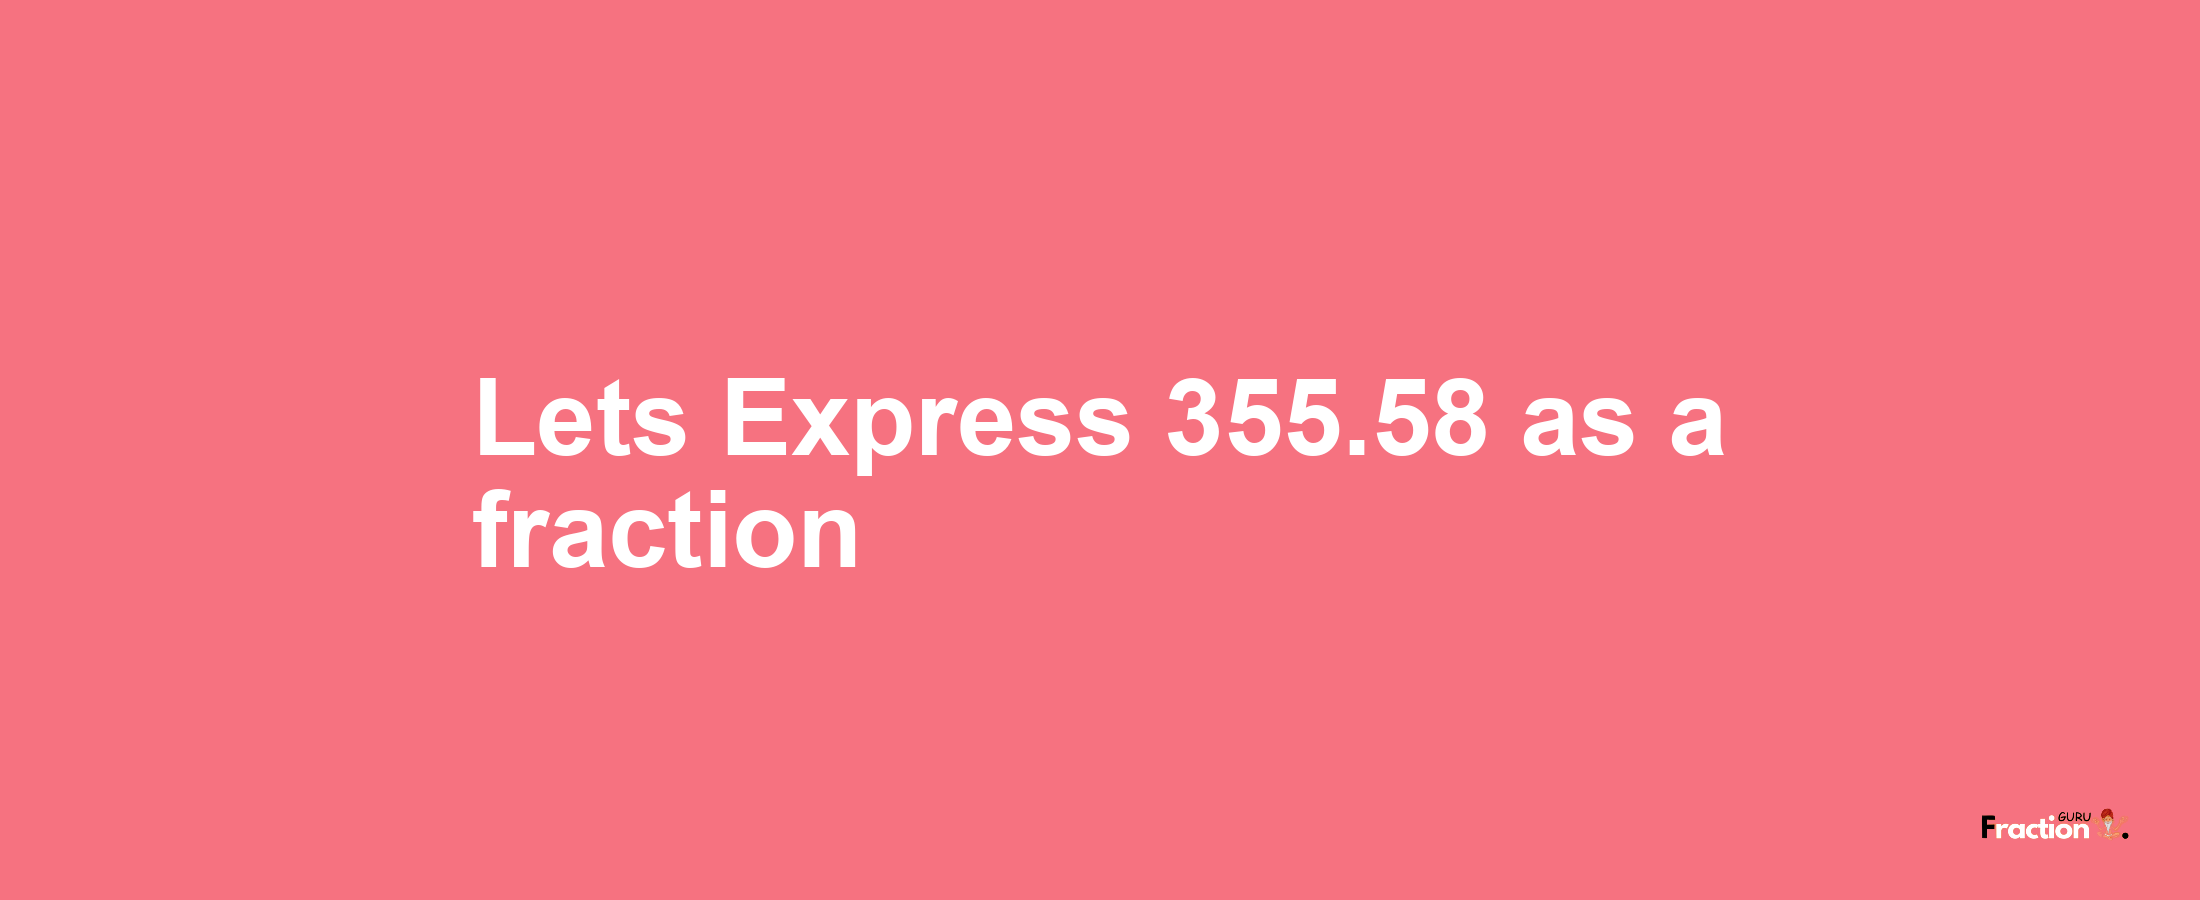 Lets Express 355.58 as afraction